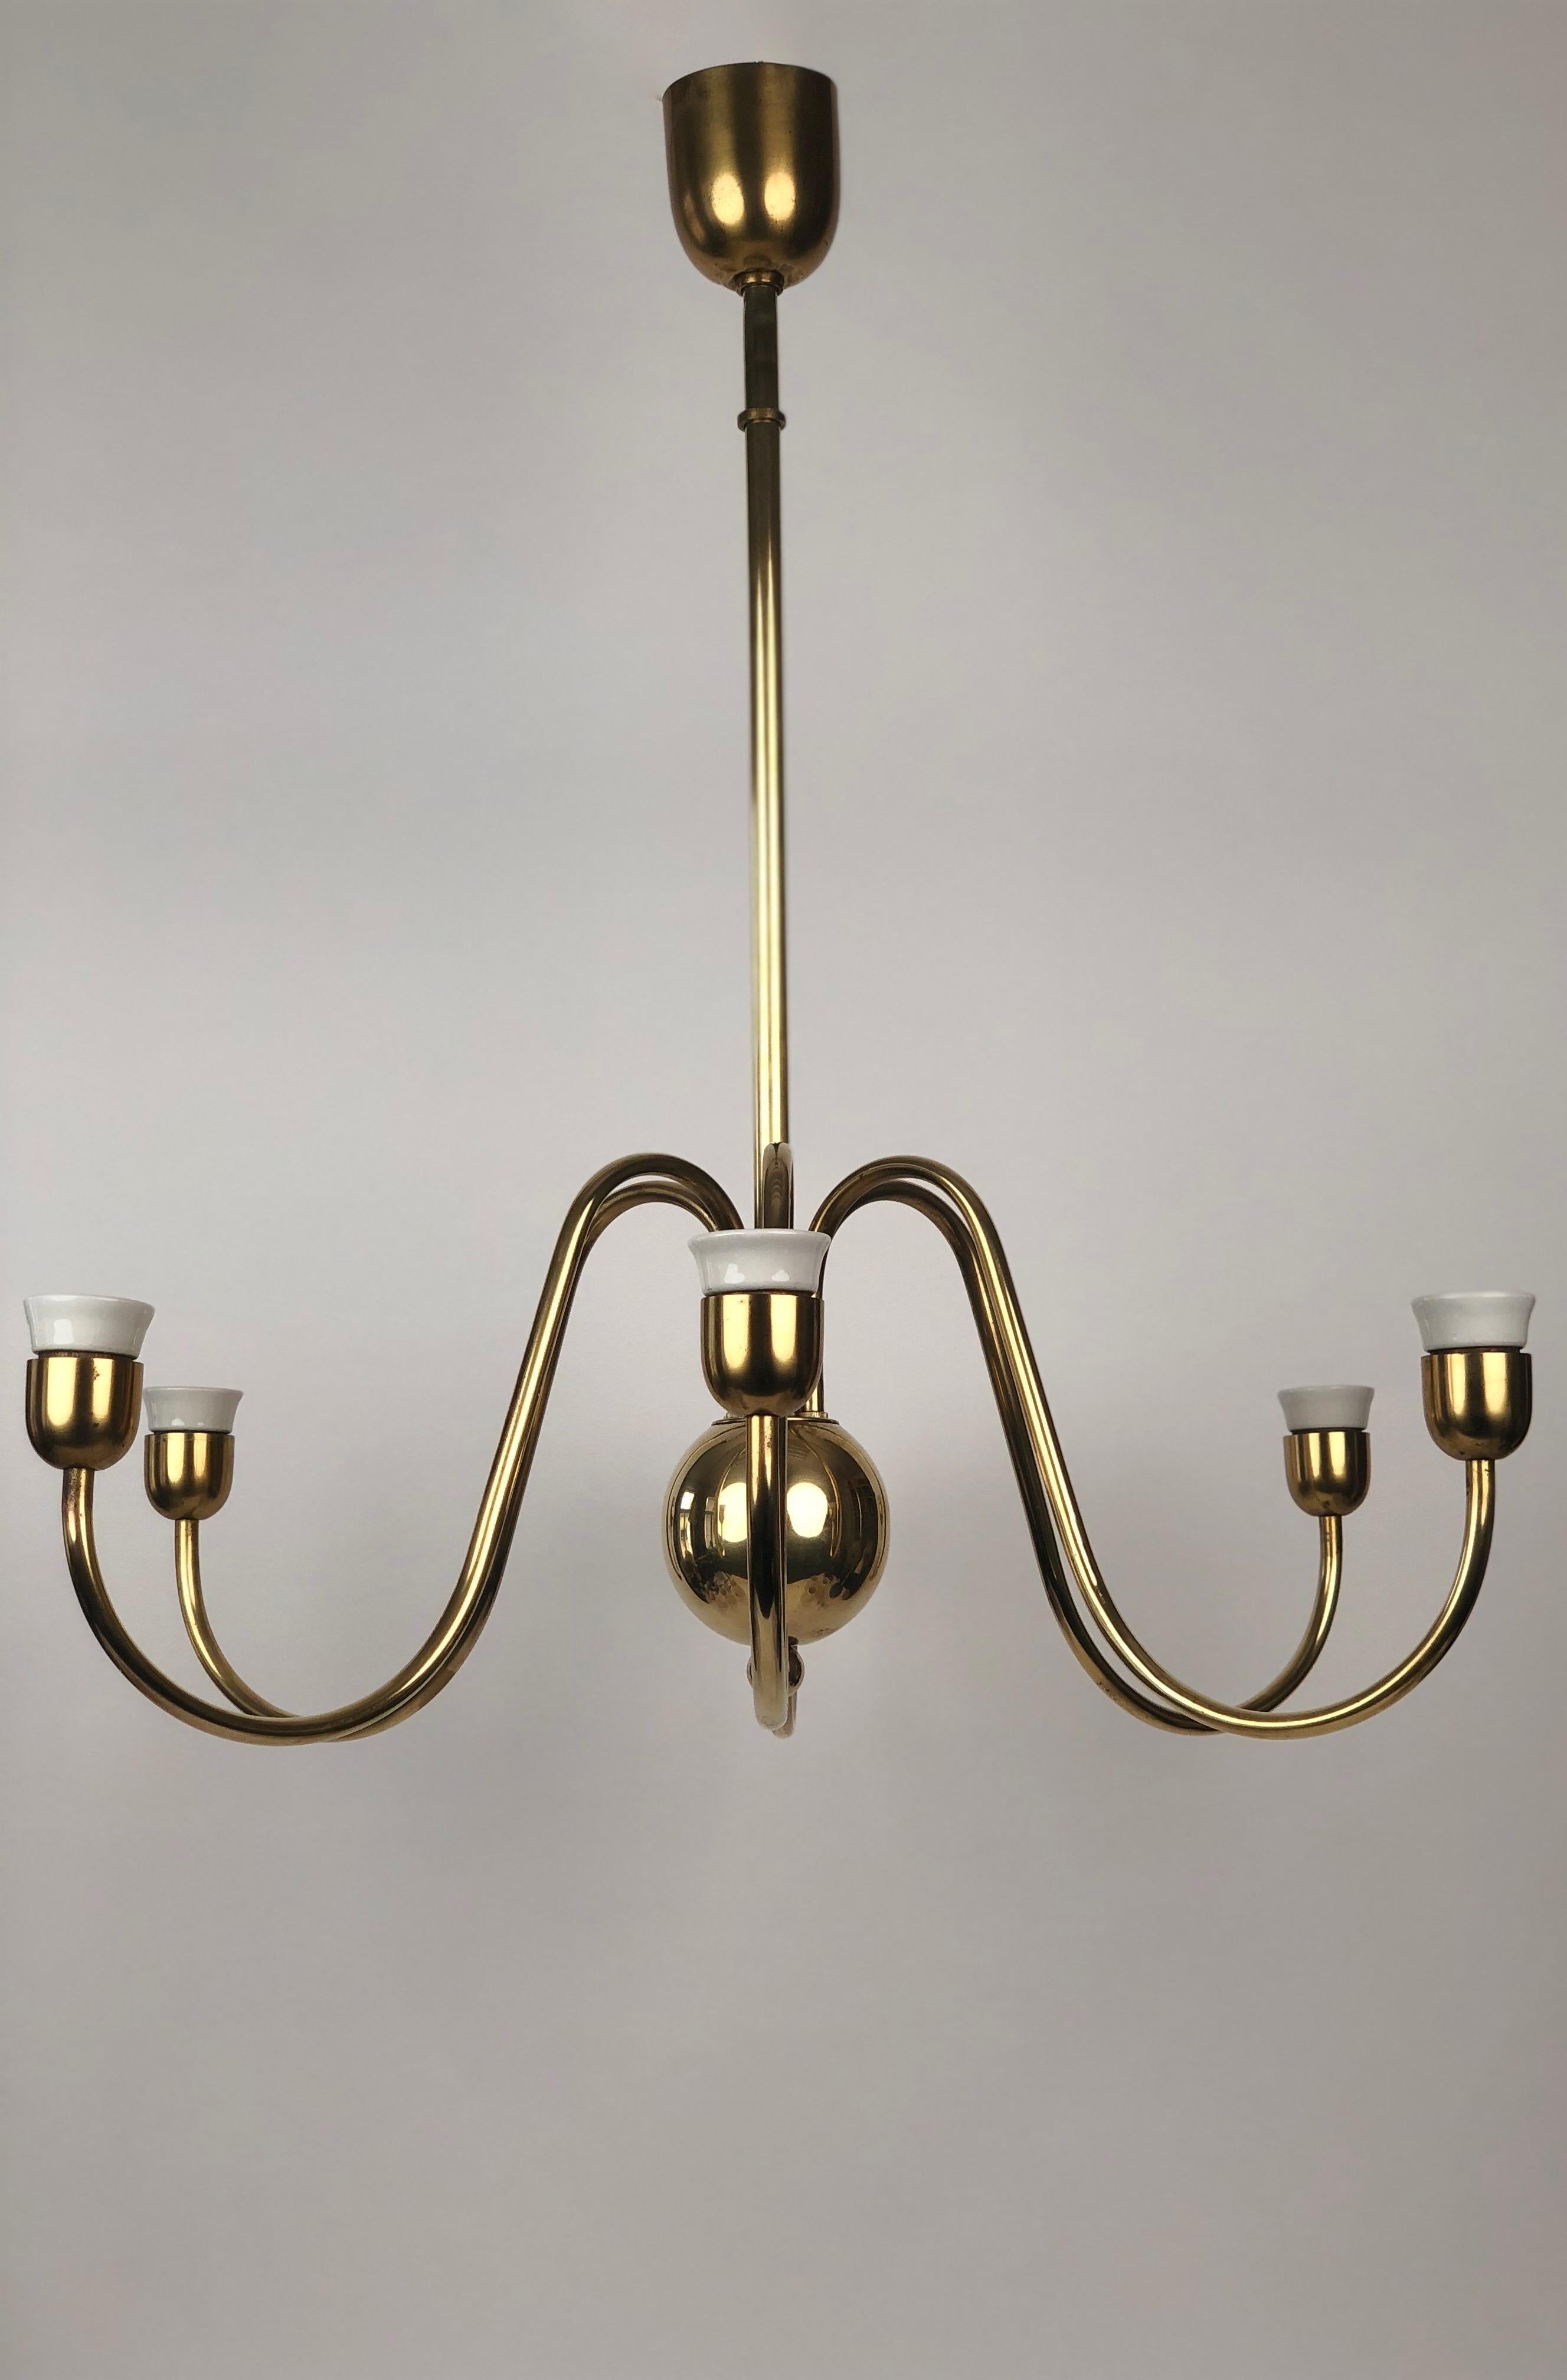 Six Arm chandelier in Brass from Josef Frank with Silk Shades, made in Austria For Sale 2